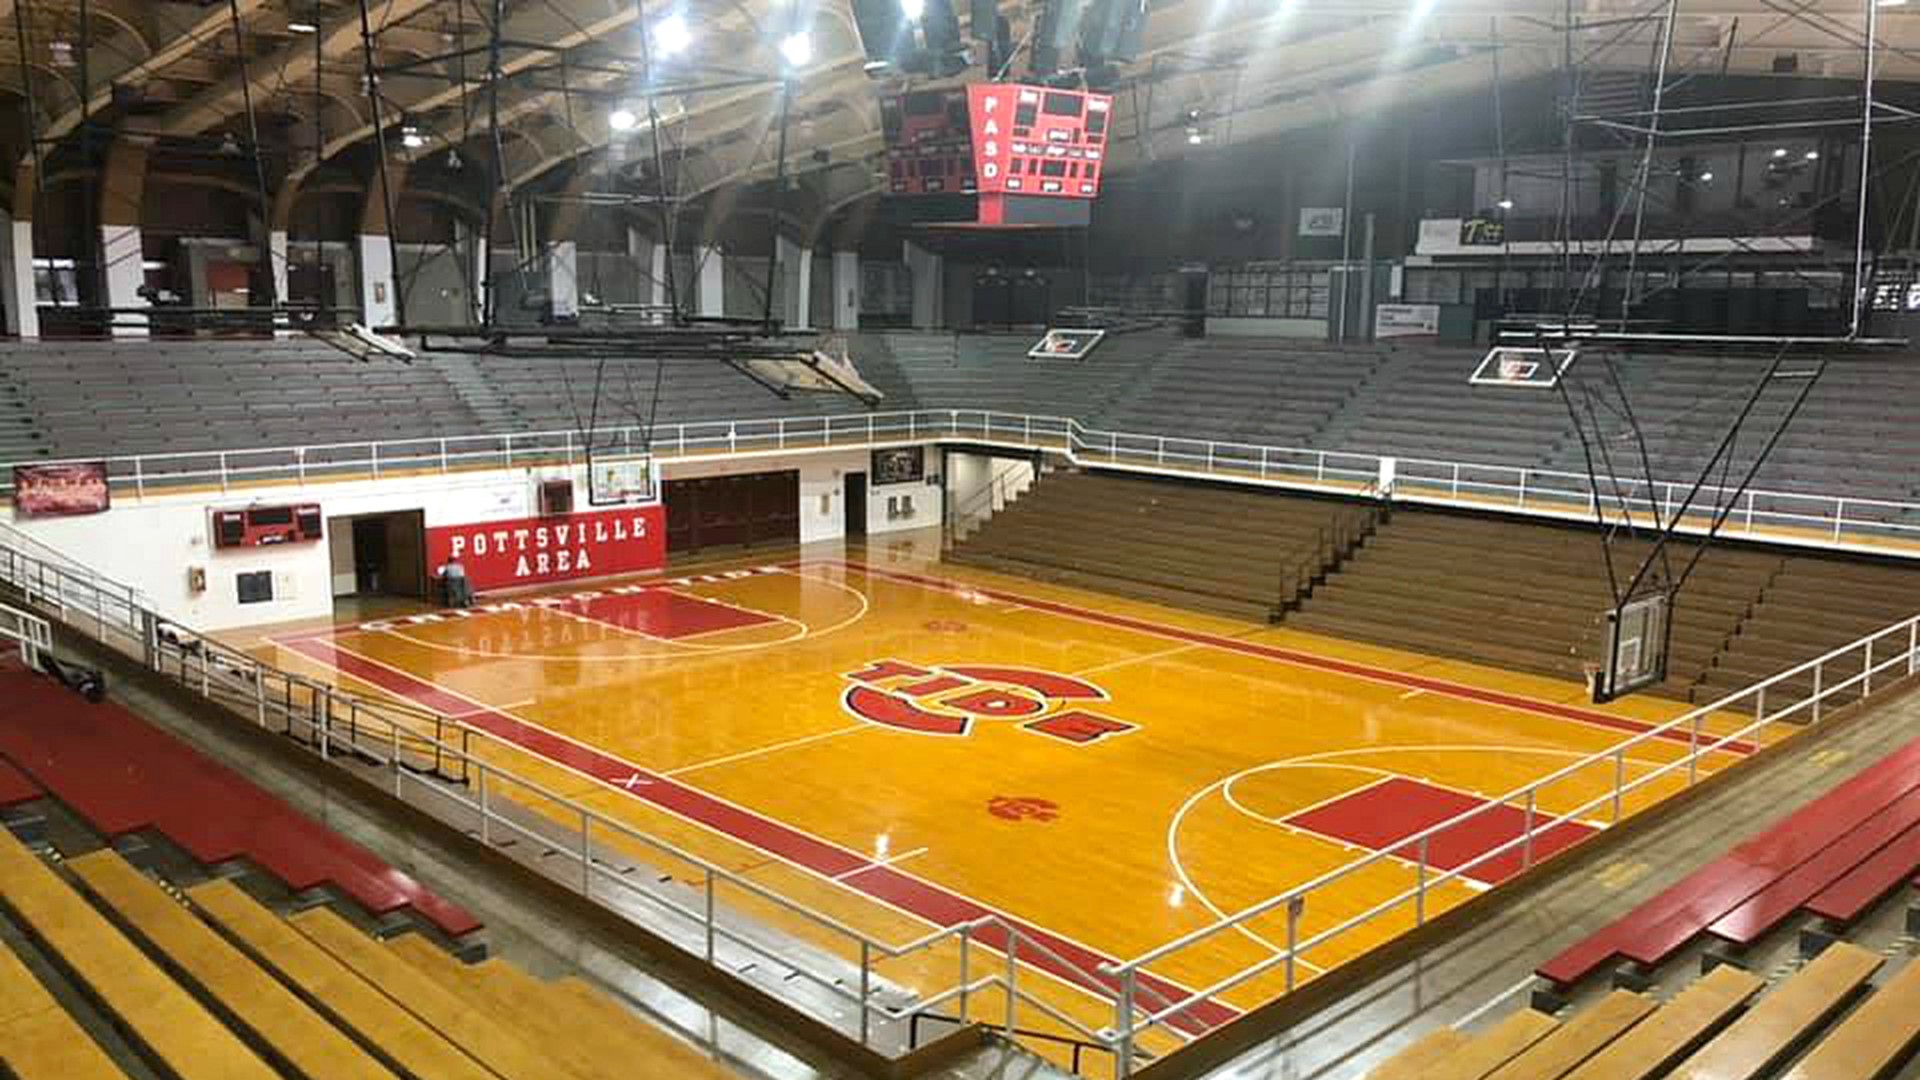 A high school gymnasium in Pottsville that many people in our area see as historic and iconic is now being recognized nationwide.